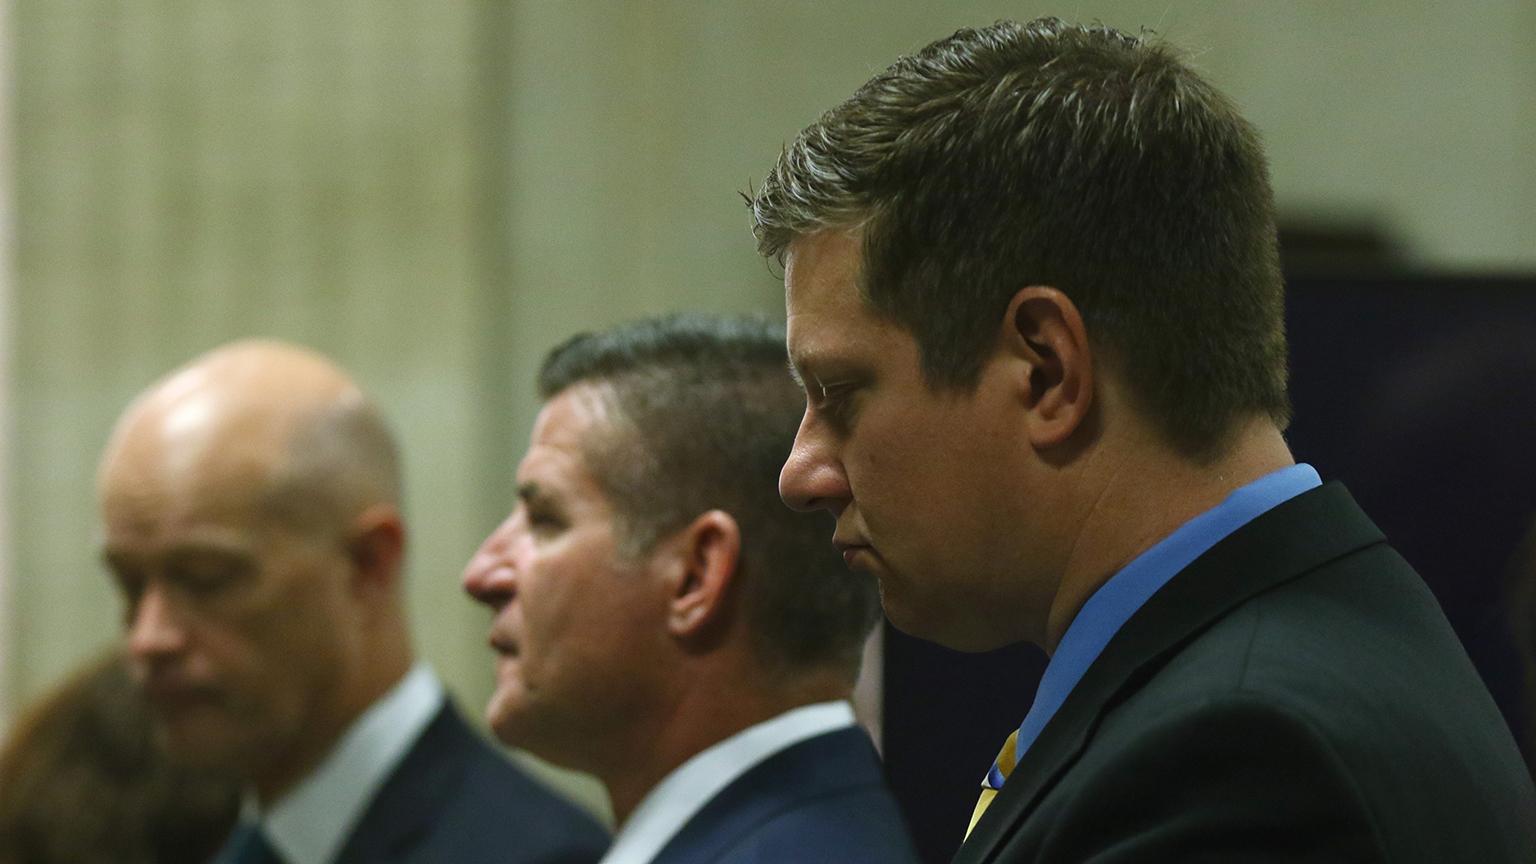 Chicago police Officer Jason Van Dyke, right, stands with attorneys during the trial for the shooting death of Laquan McDonald at the Leighton Criminal Court Building on Wednesday, Sept. 19, 2018. (John J. Kim / Chicago Tribune / Pool)